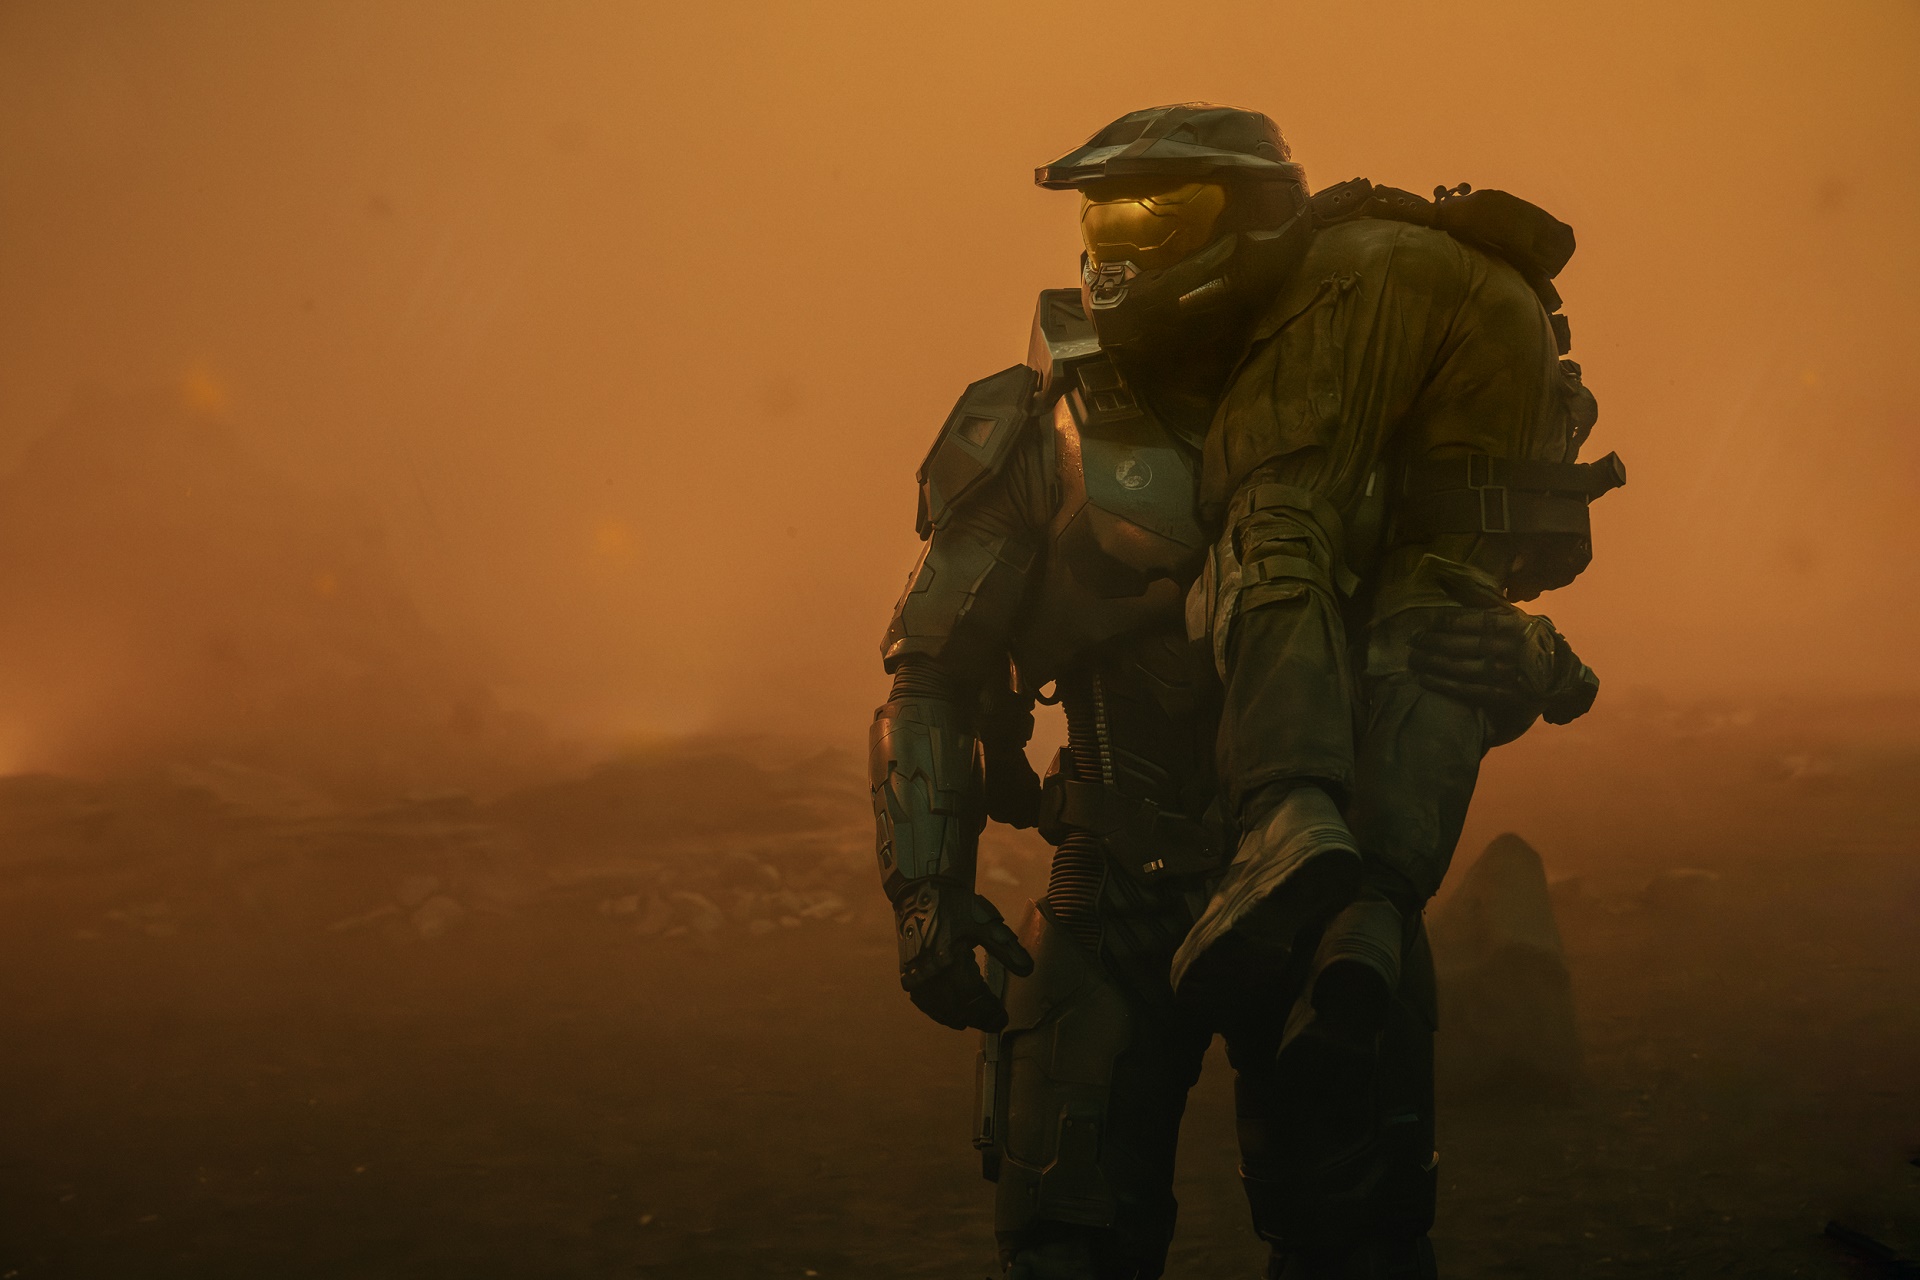 Halo The Series image of the Master Chief carrying Corporal Perez over his shoulder